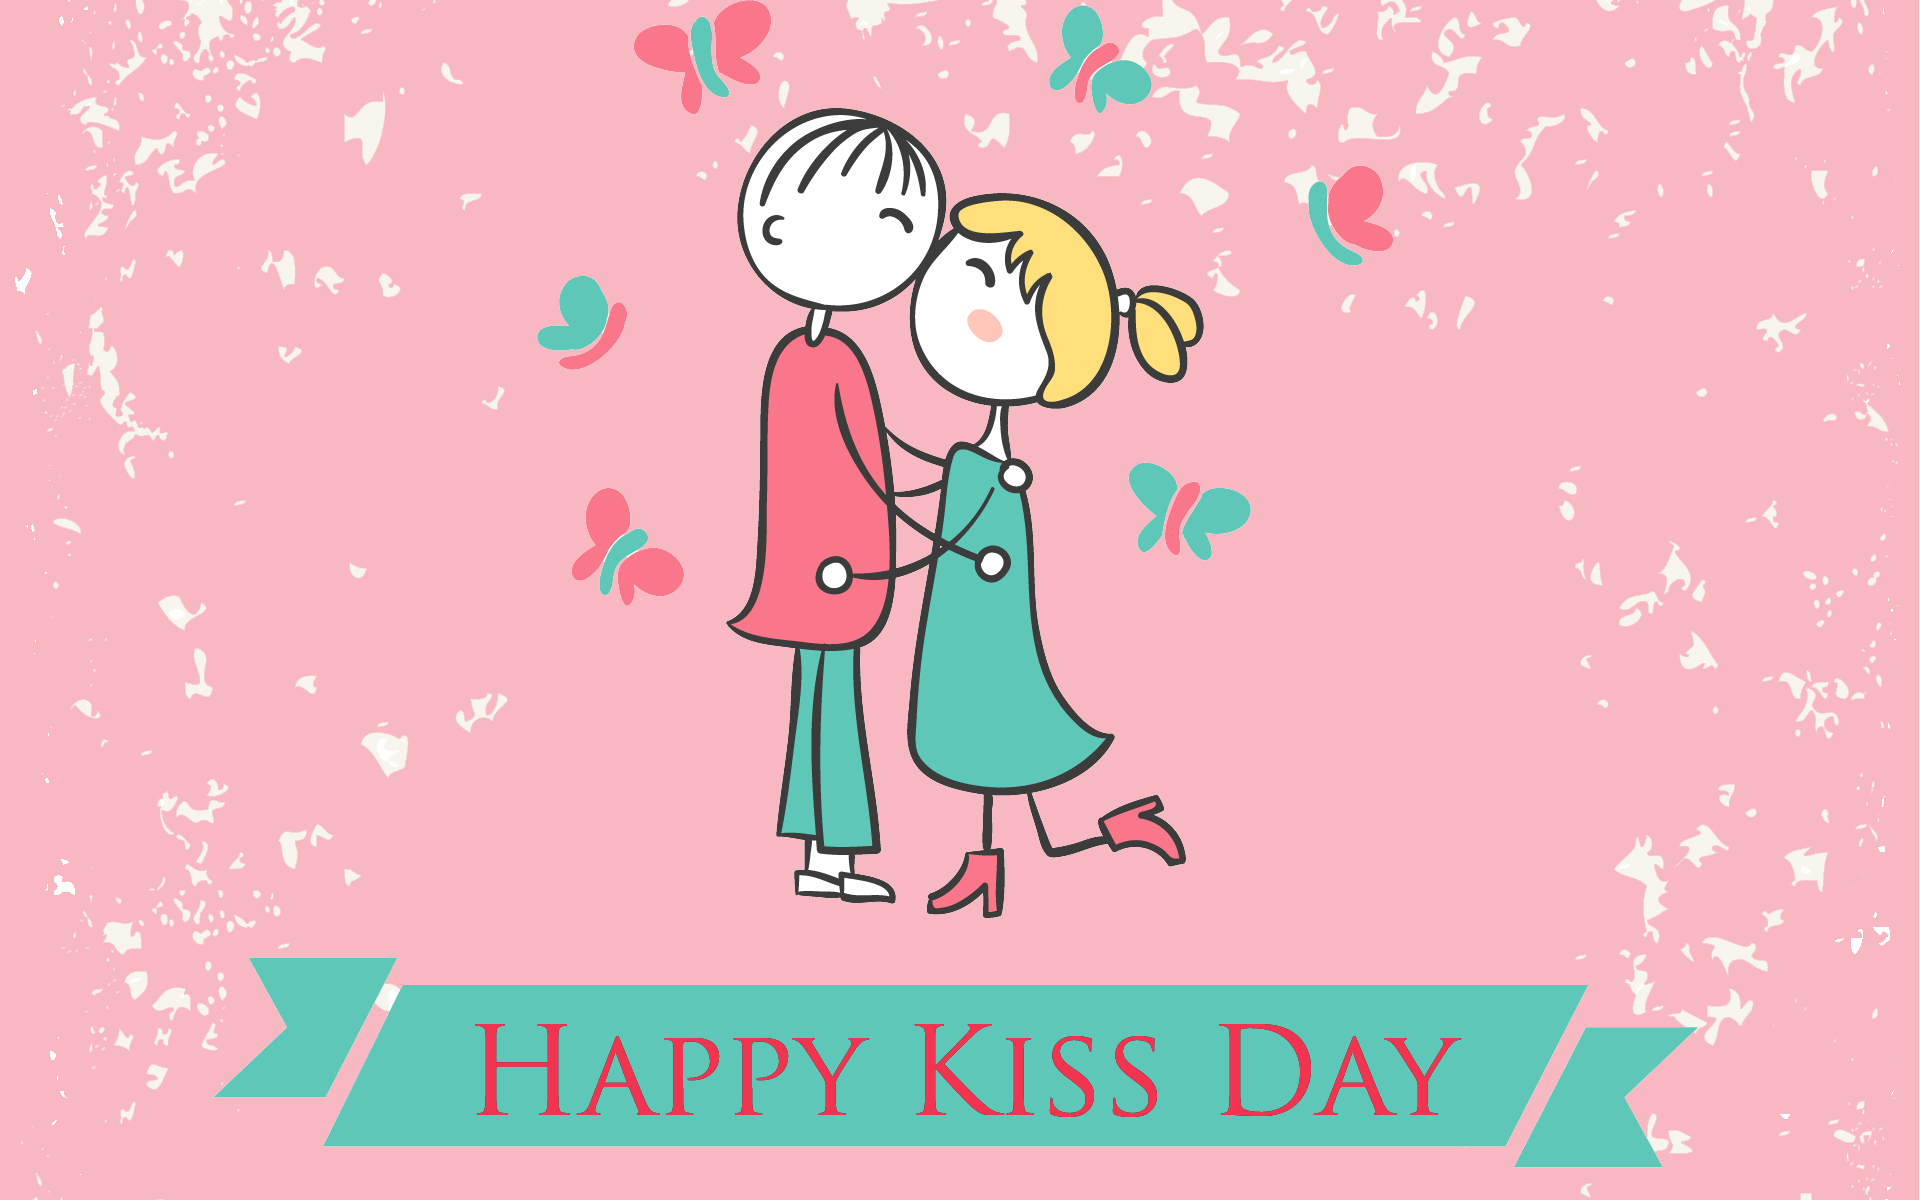 happy kiss day beautiful wallpapers,cartoon,pink,text,illustration,love